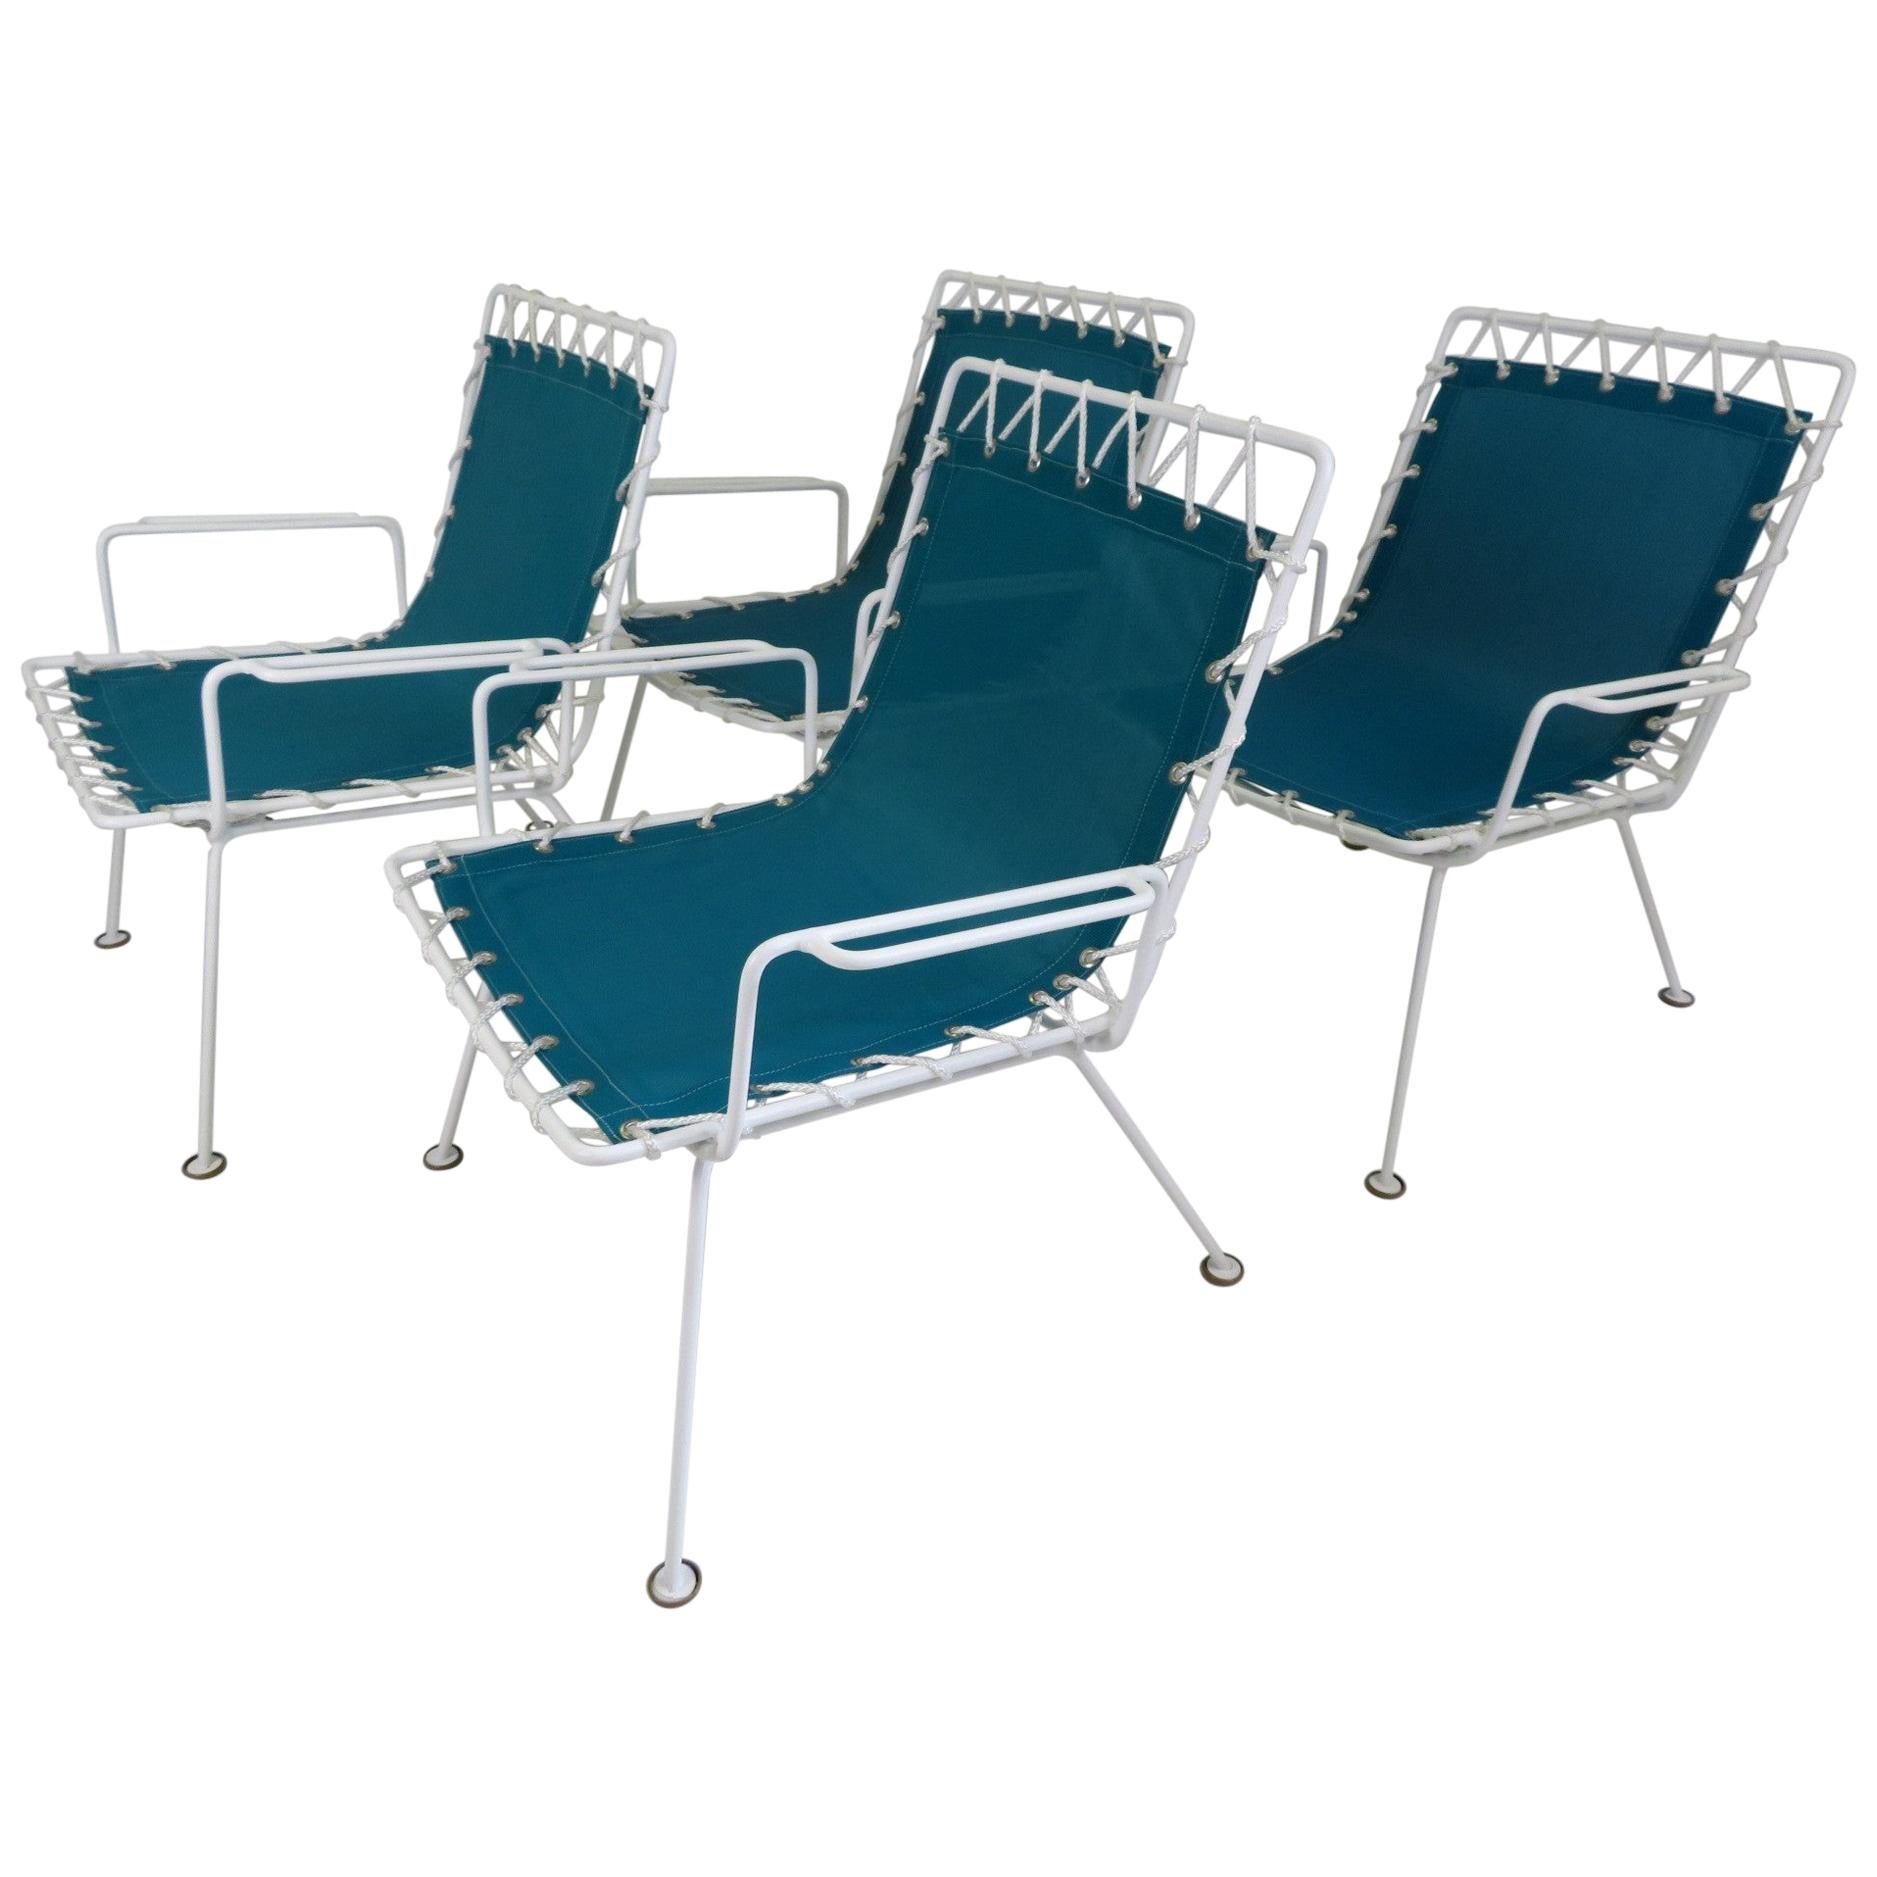 Pipsan Saarinen Swanson Sol Air Set of 4 Outdoor Chairs 1950s Ficks Reed Co.